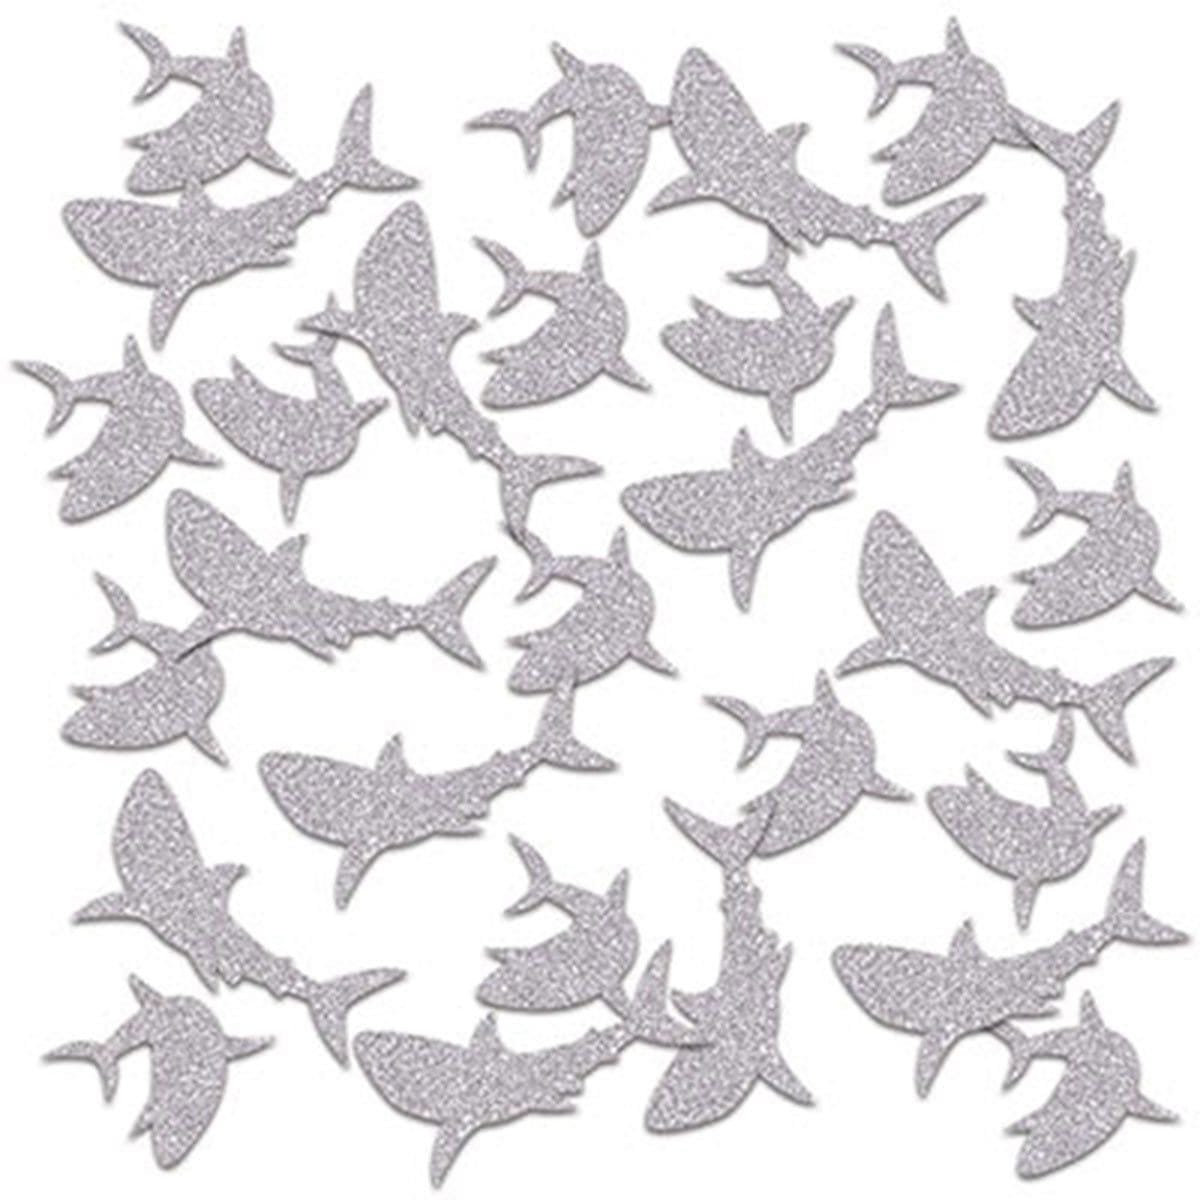 Buy Kids Birthday Shark Deluxe Confetti sold at Party Expert